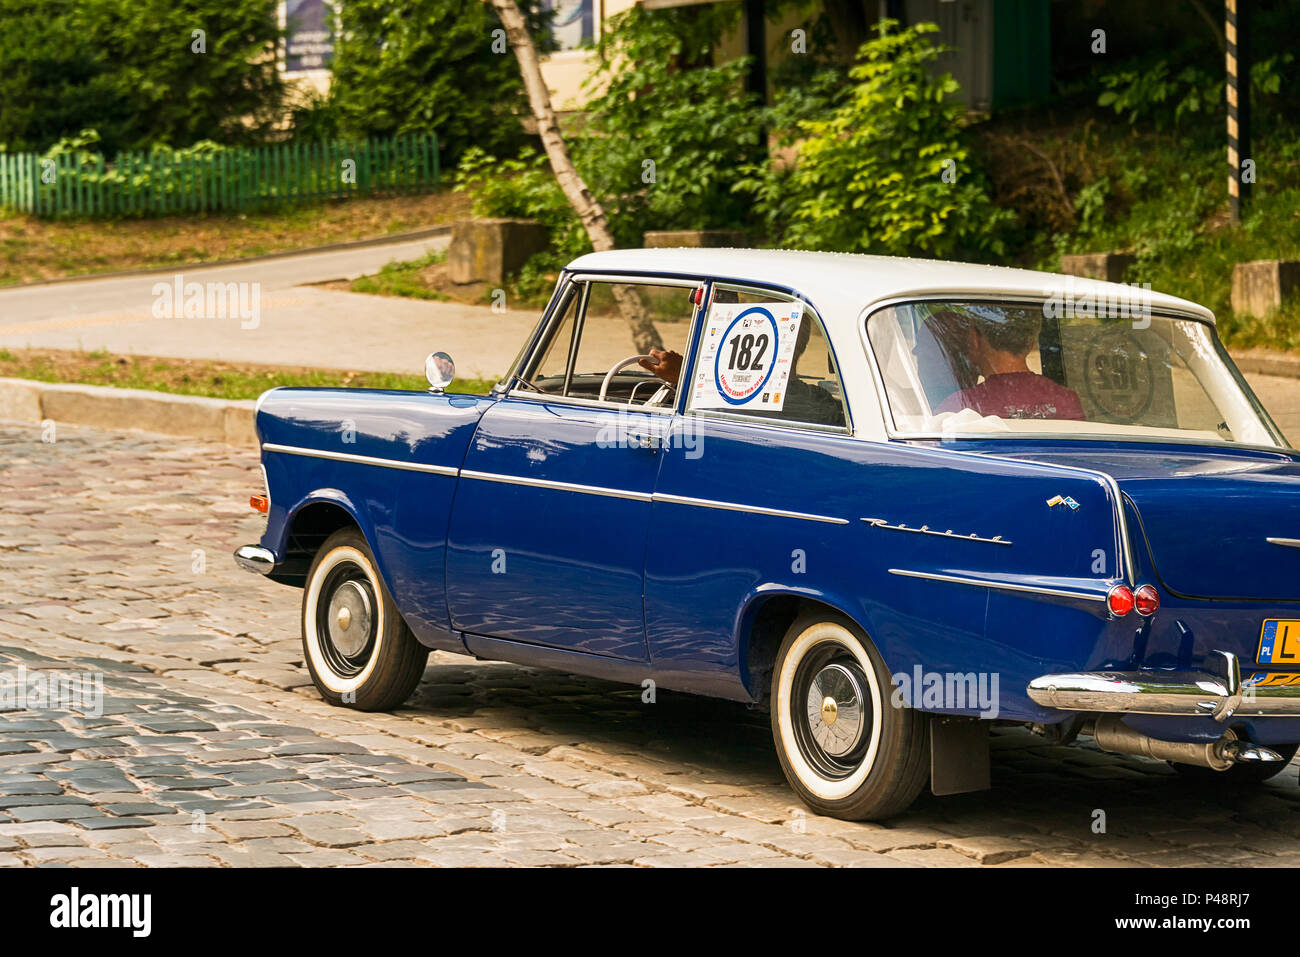 Lviv, Ukraine - June 3, 2018:Old retro car Opel RFN with its owner and an unknown passenger taking participation in race Leopolis grand prix 2018, Ukr Stock Photo